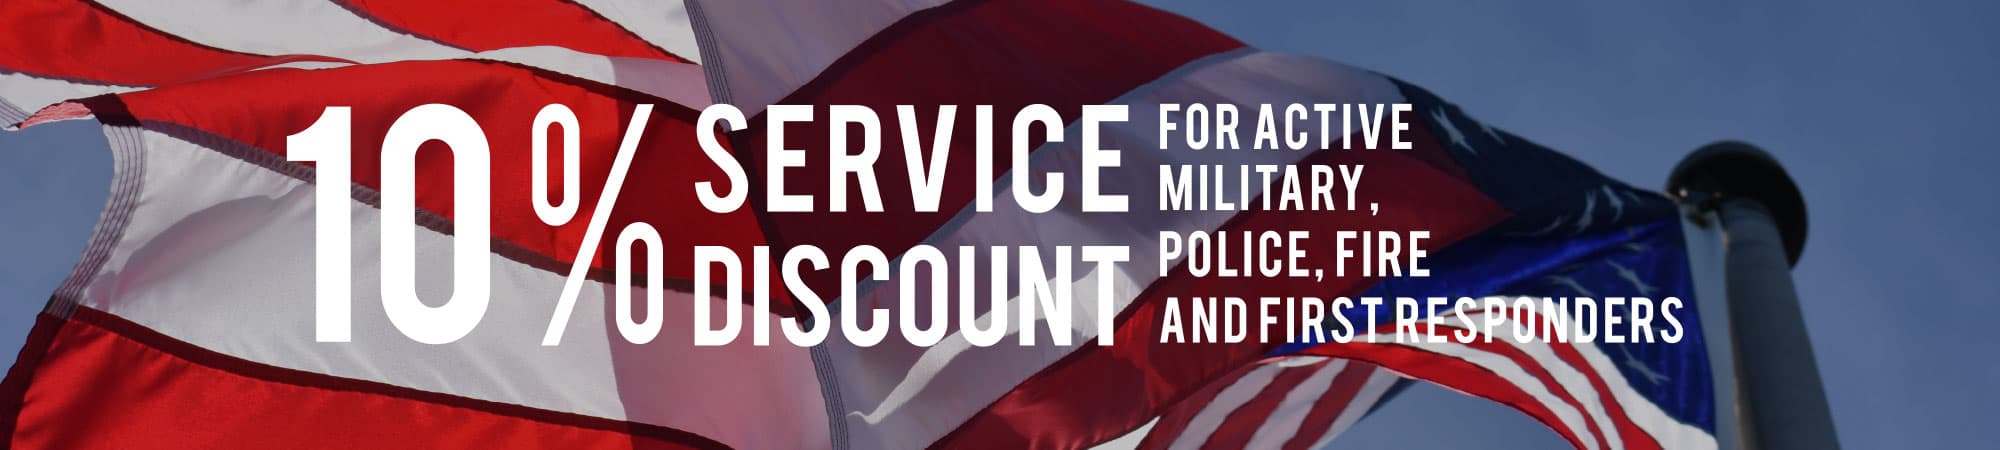 Military & Service Discount